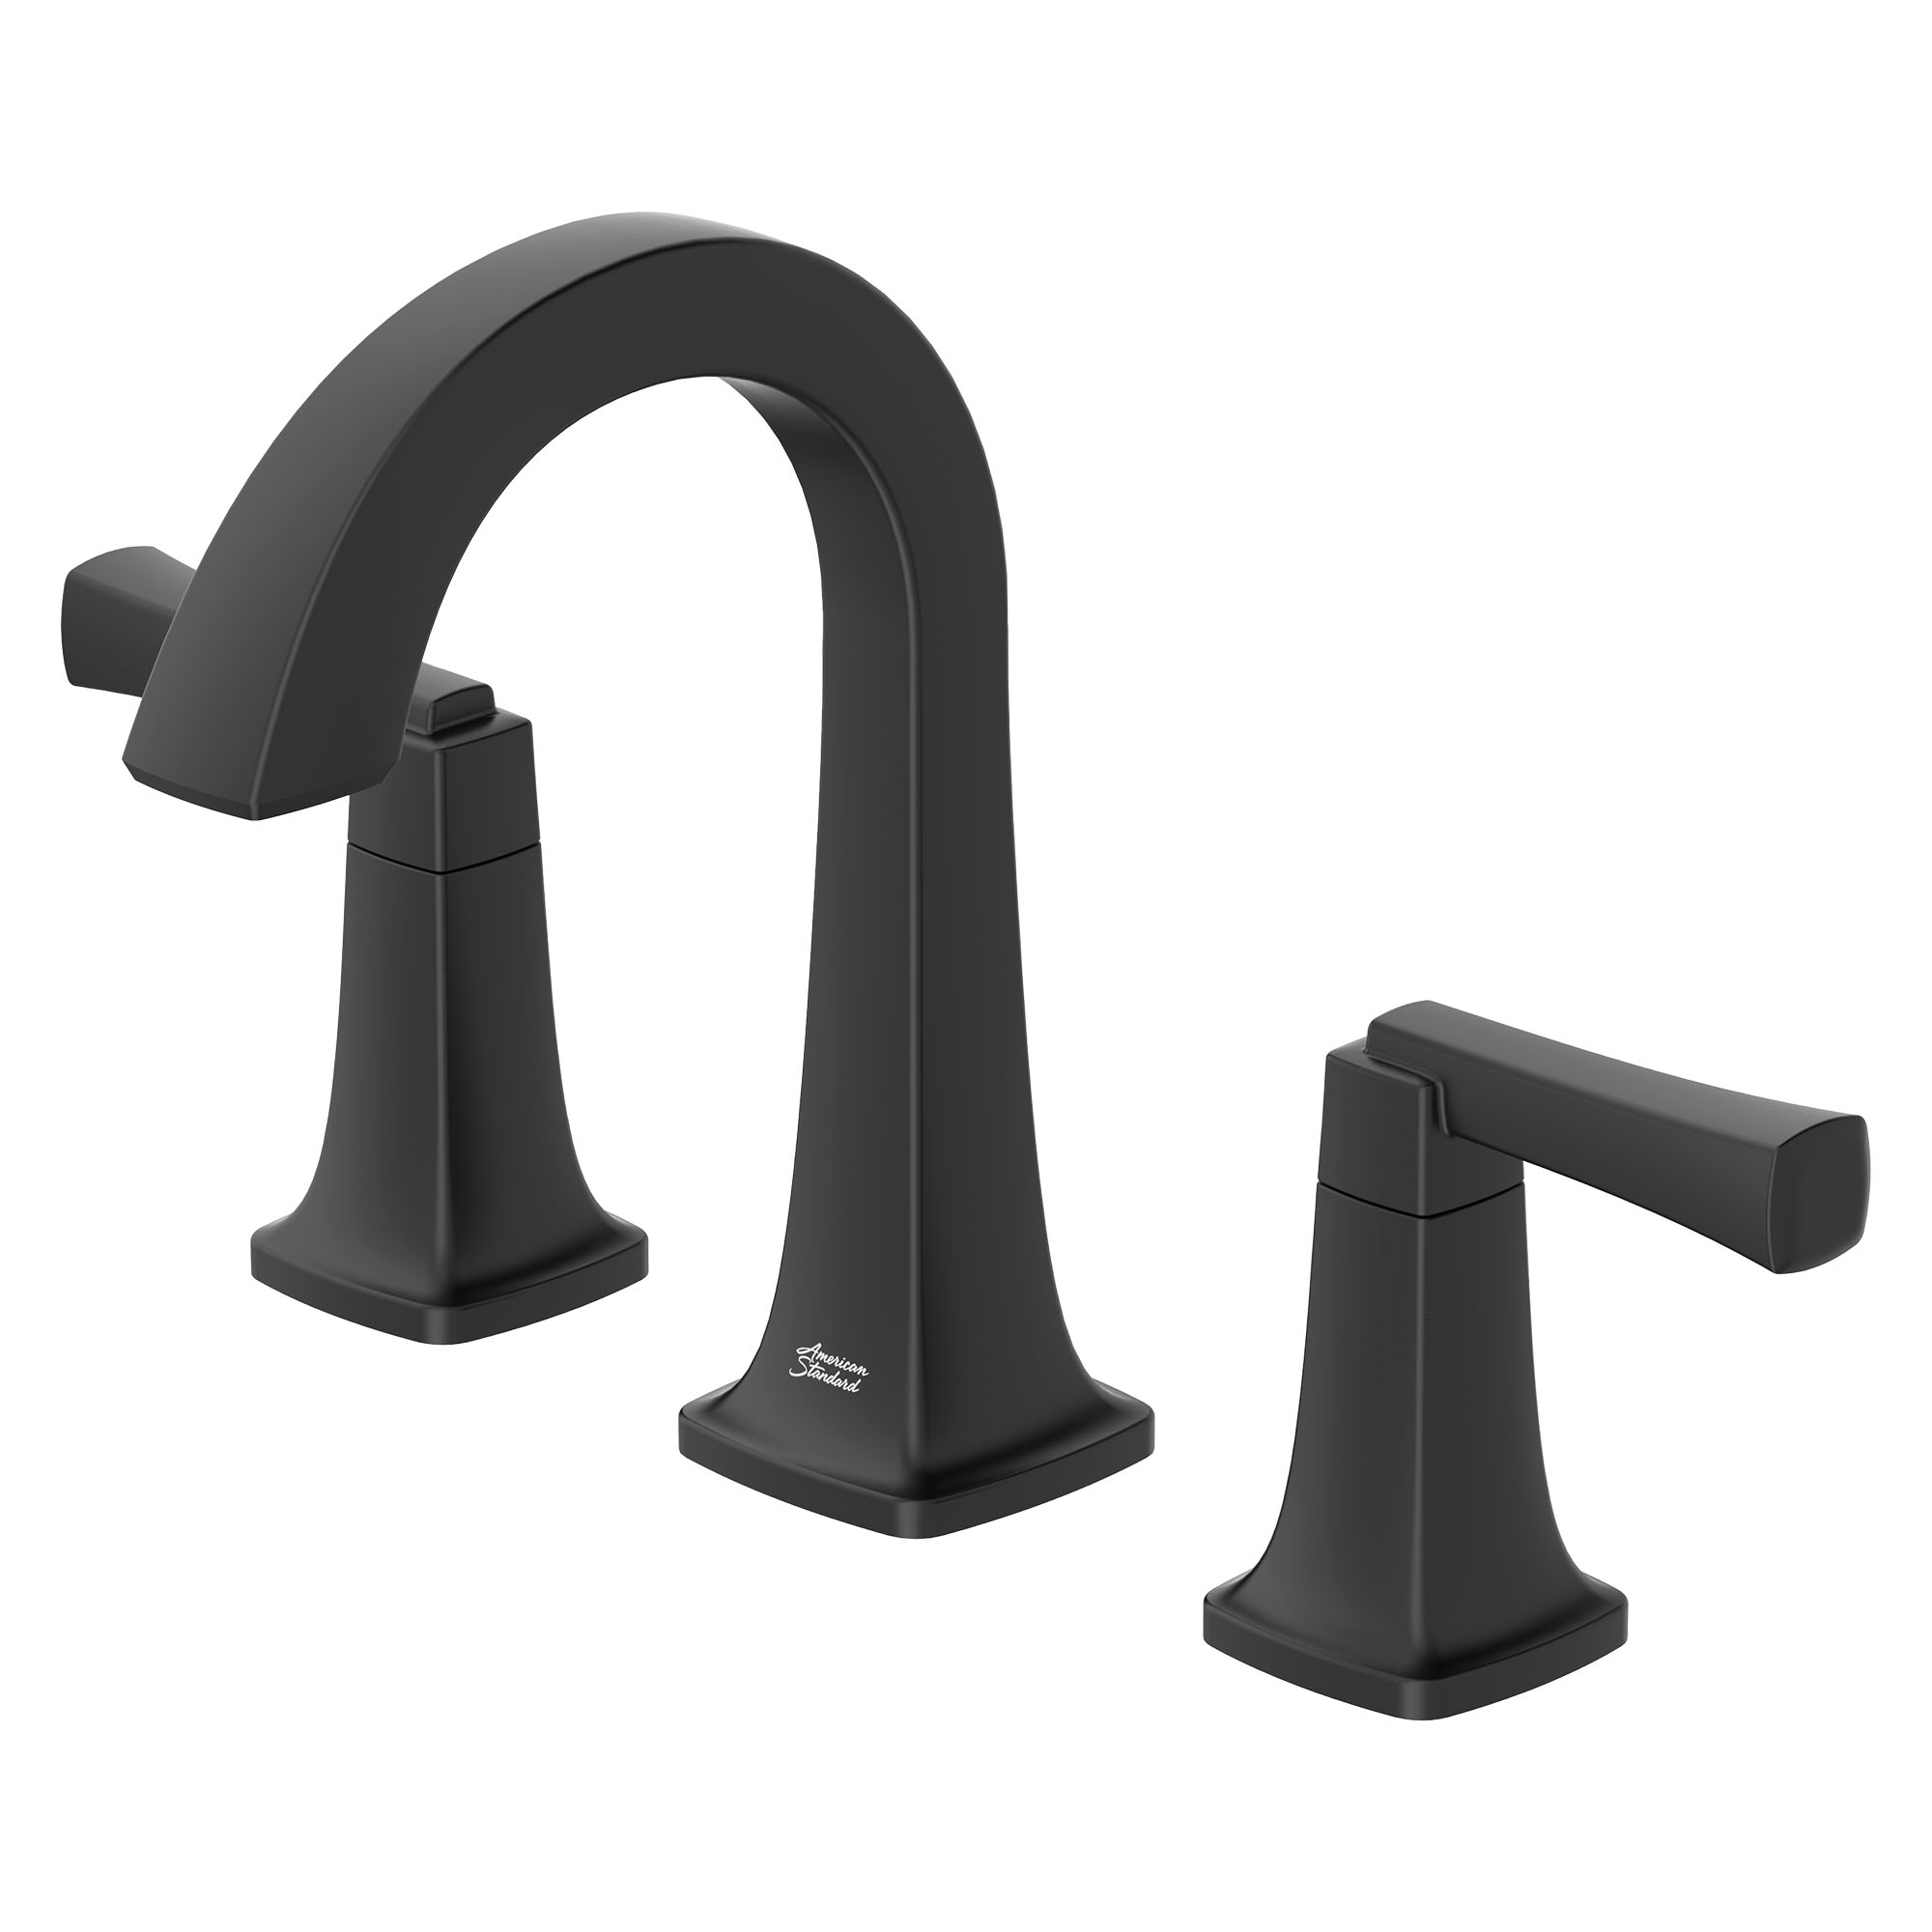 Townsend® 8-Inch Widespread 2-Handle Bathroom Faucet 1.2 gpm/4.5 L/min With Lever Handles